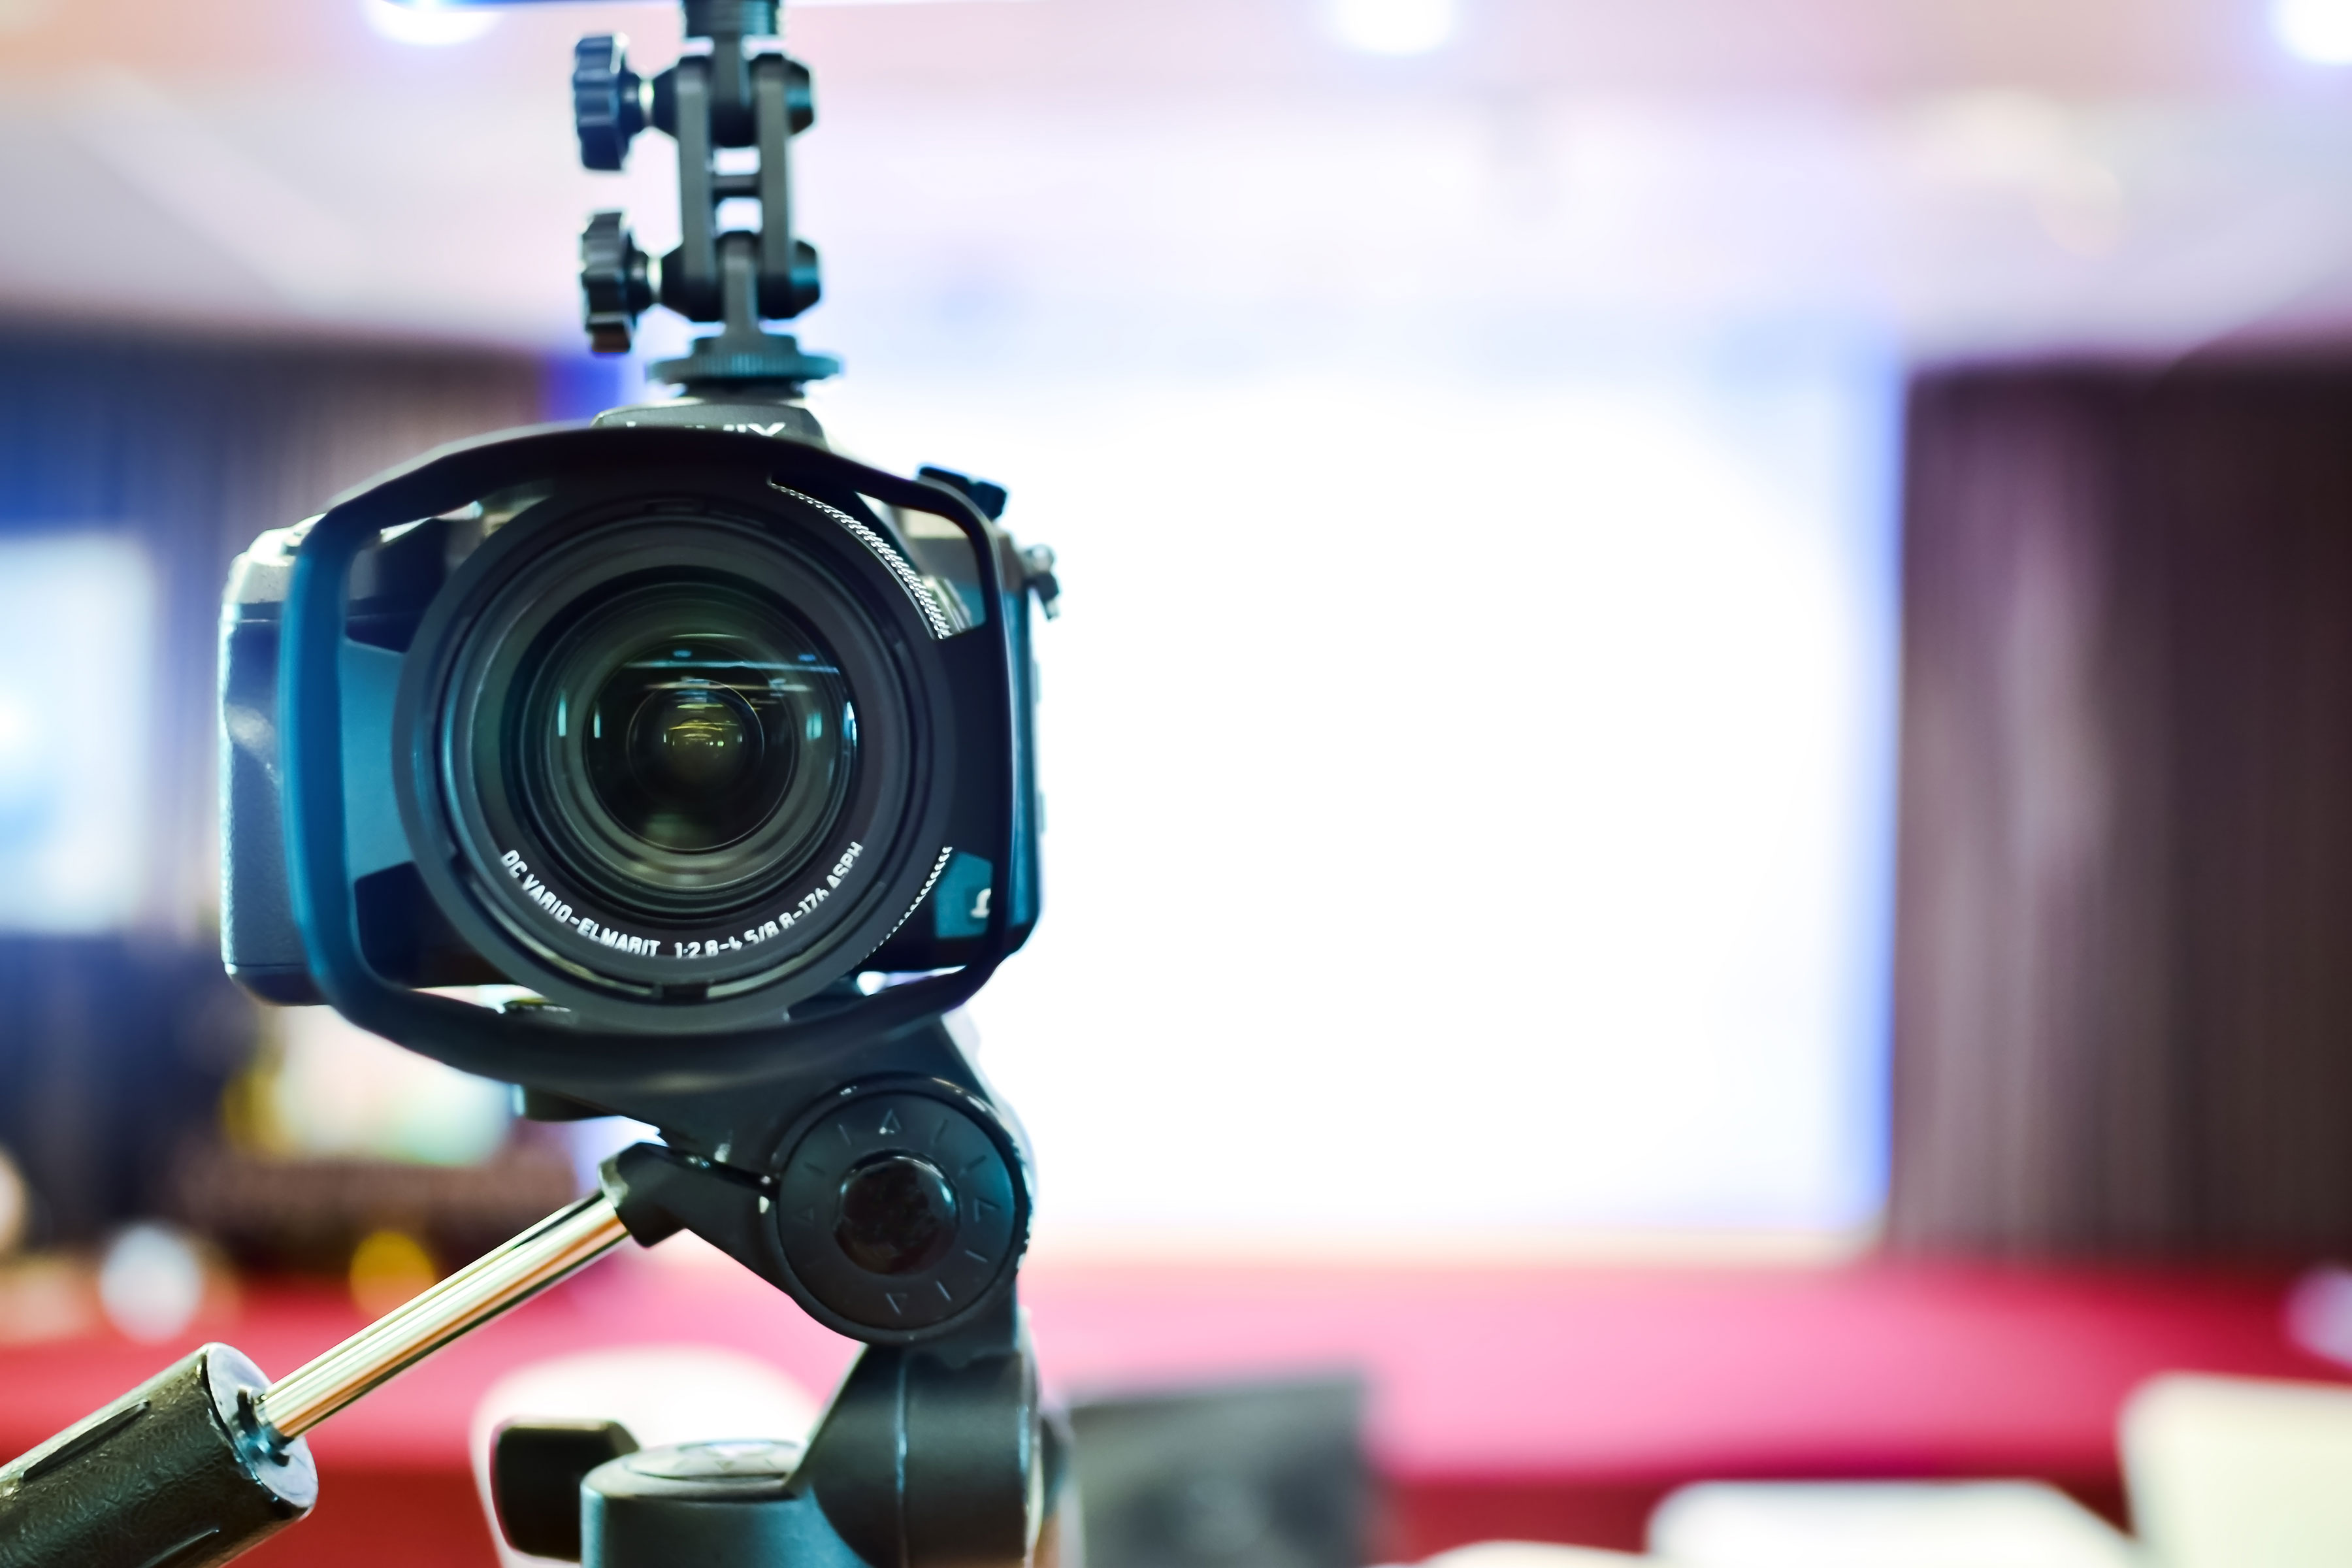 How to Create an effective video marketing strategy. Video production and marketing strategies that sell.